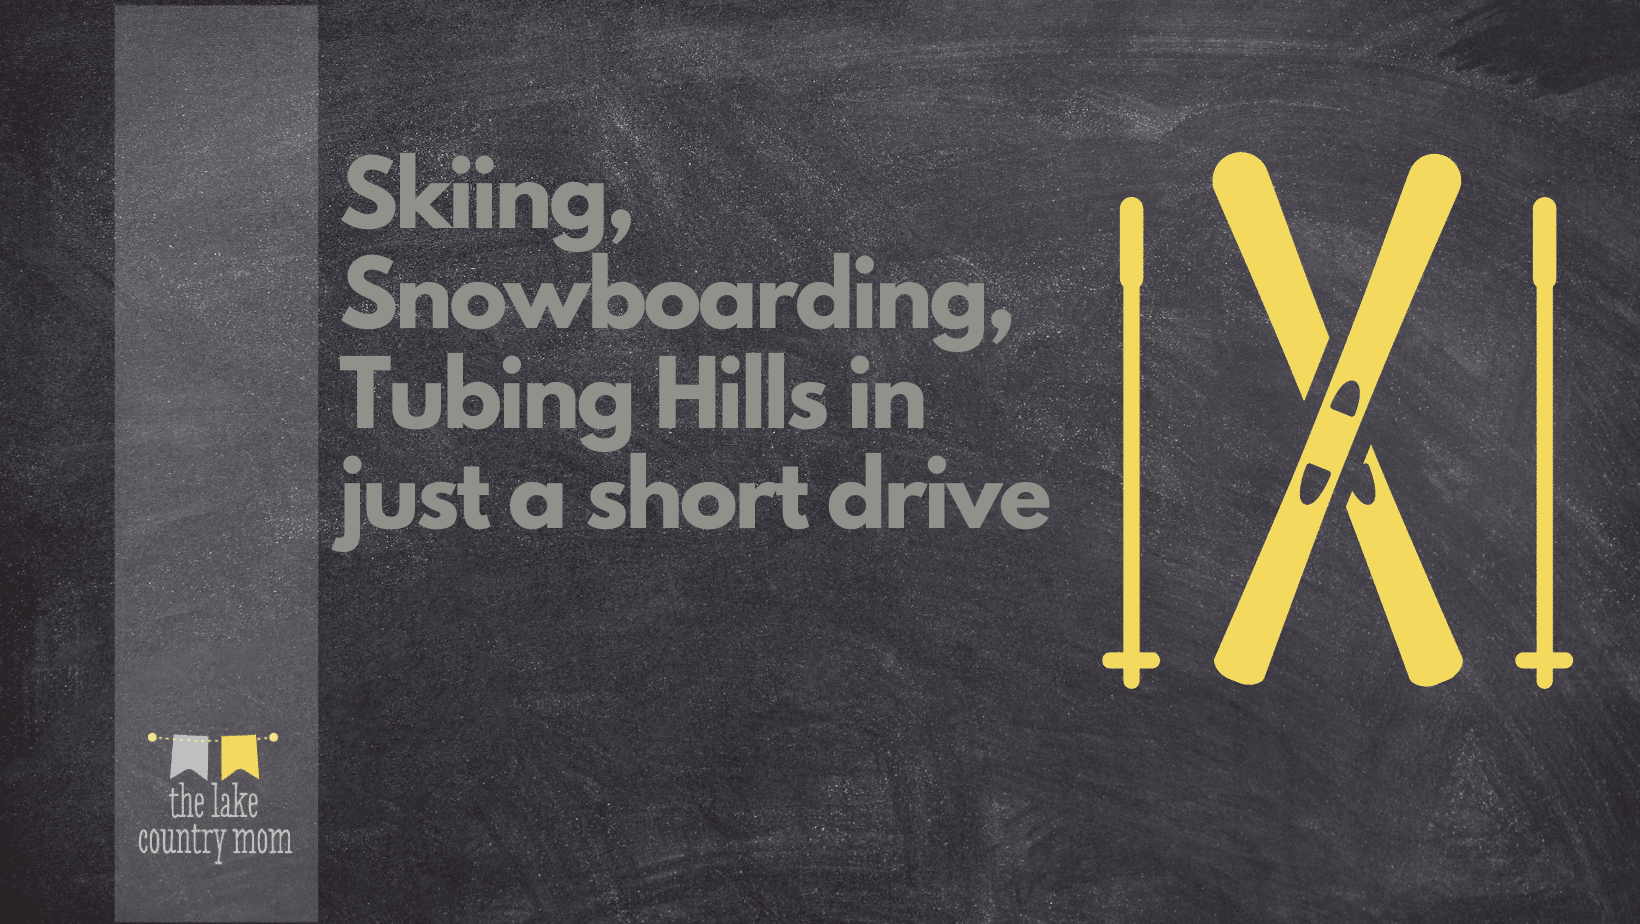 Skiing, Snowboarding, Tubing Hills in just a short drive